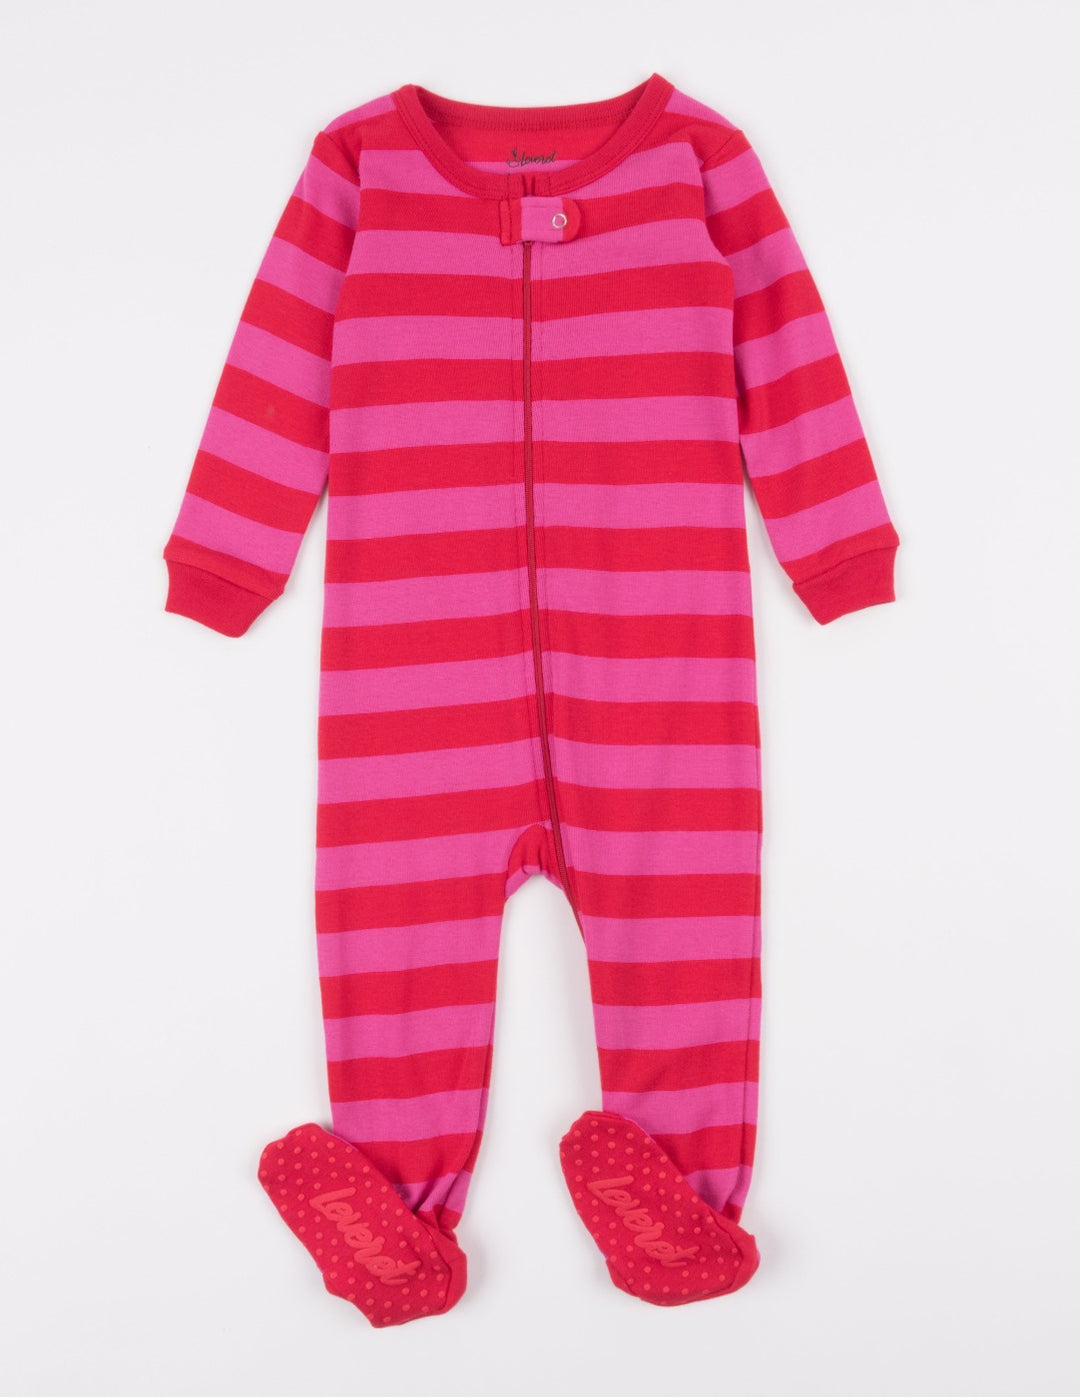 red and pink striped baby footed pajamas